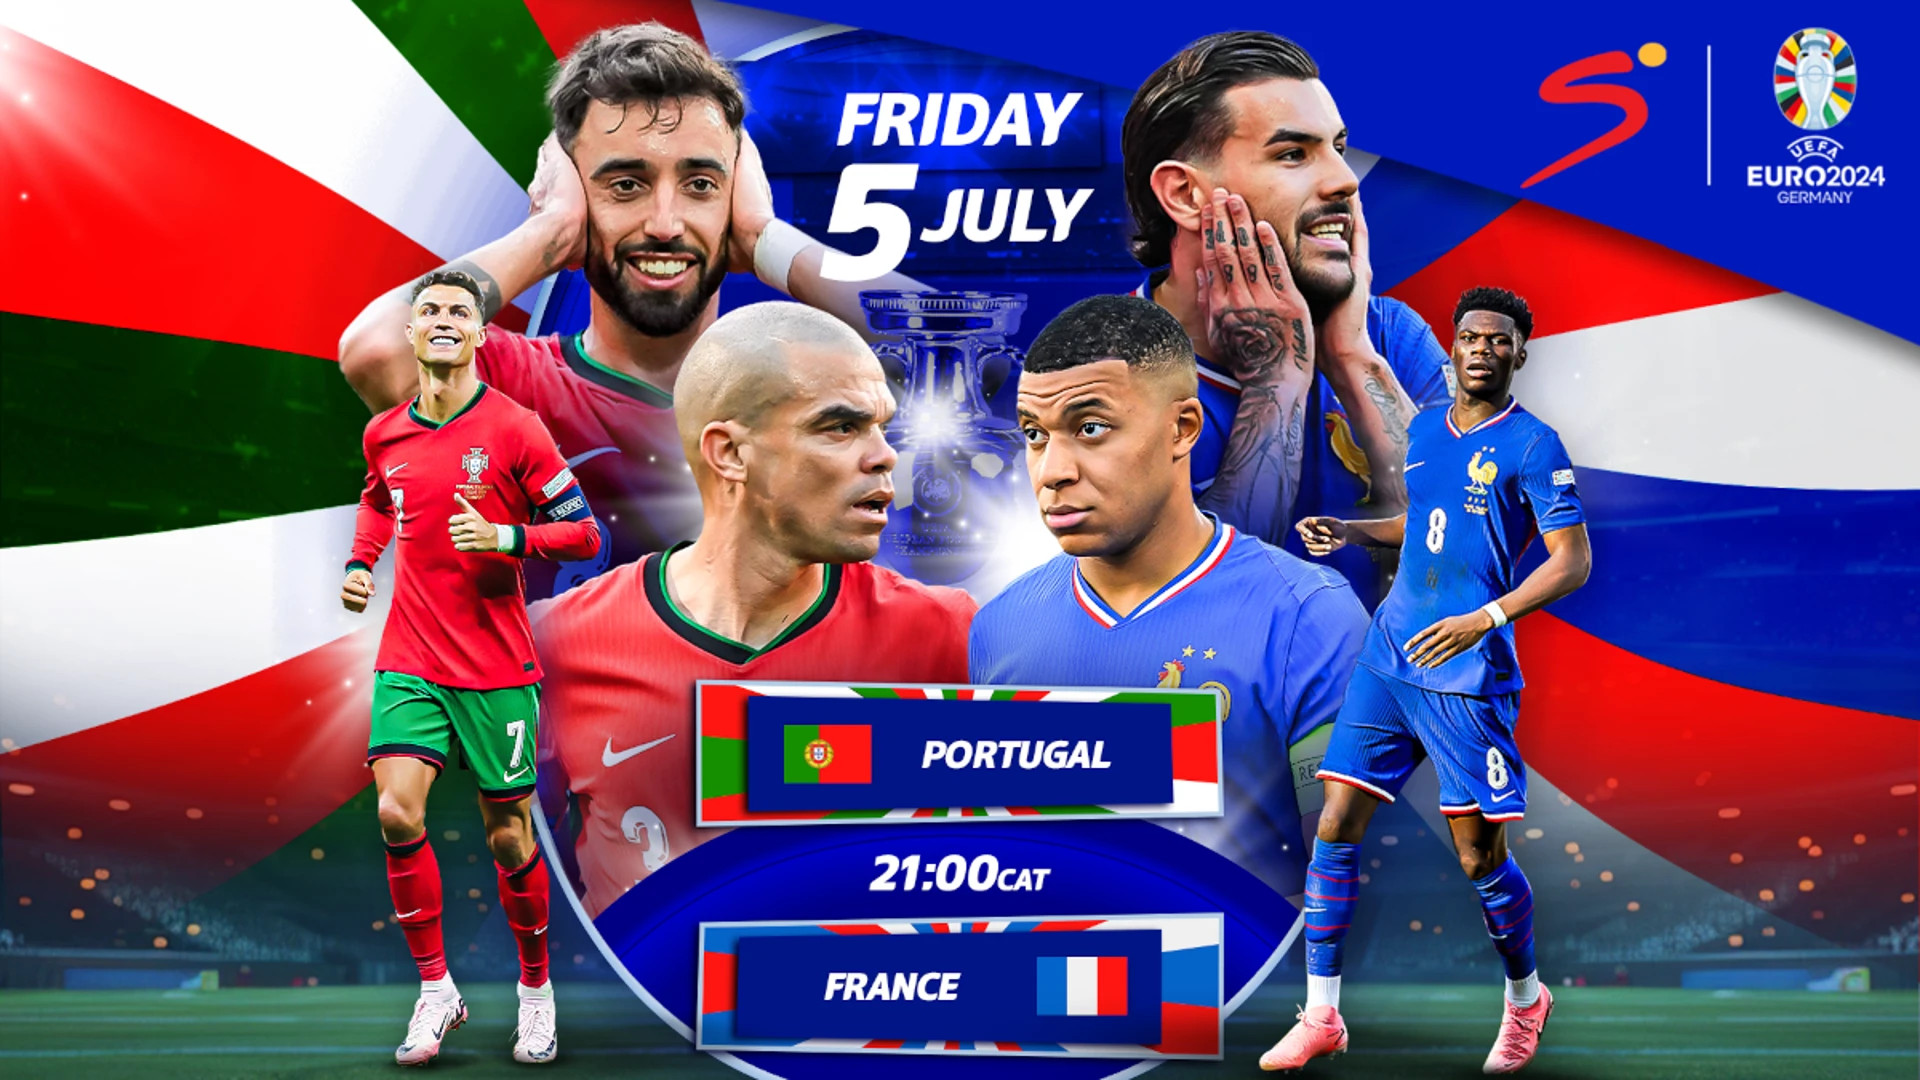  Mbappe, Ronaldo face off as France and Portugal clash at Euro 2024